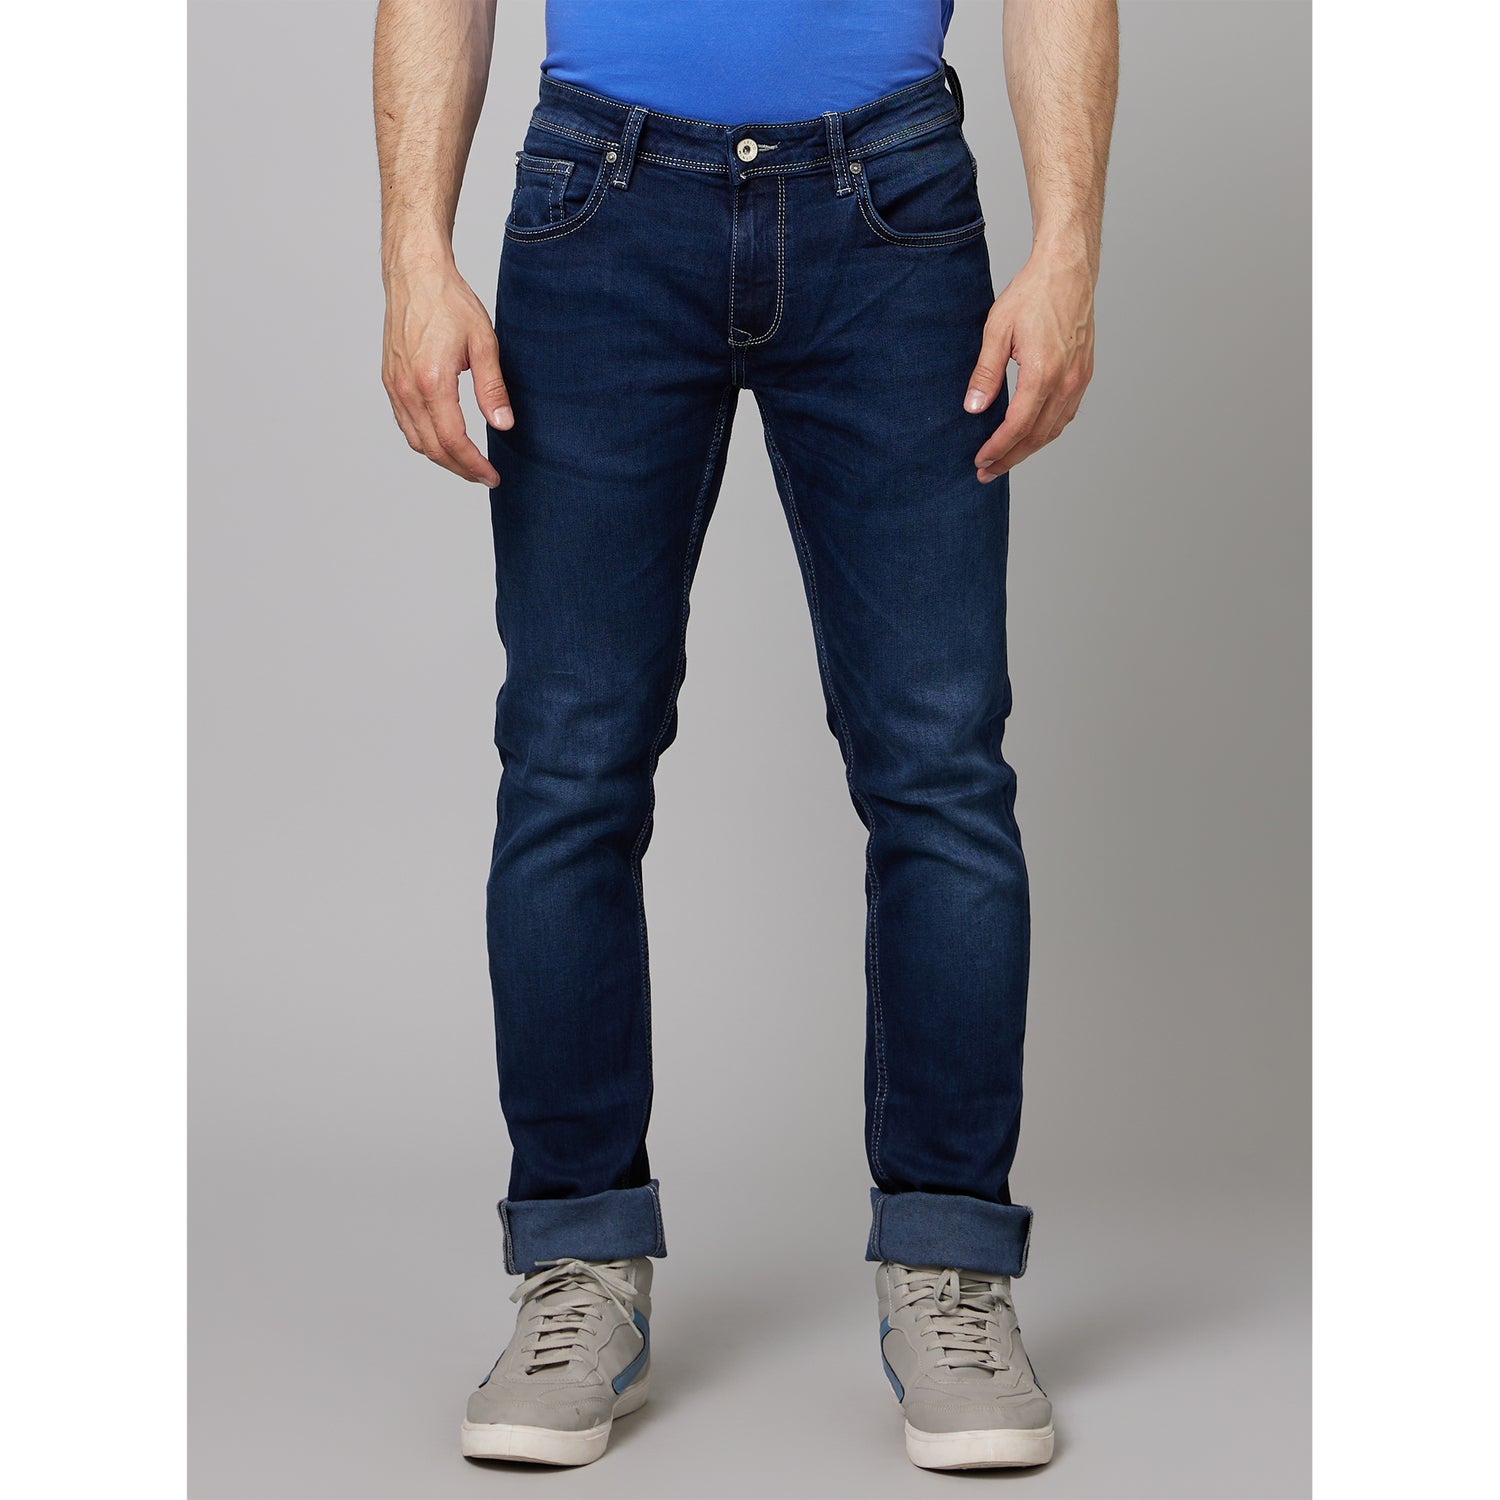 Navy Blue Mid-Rise Stretchable Jeans (COECOBLUE25)